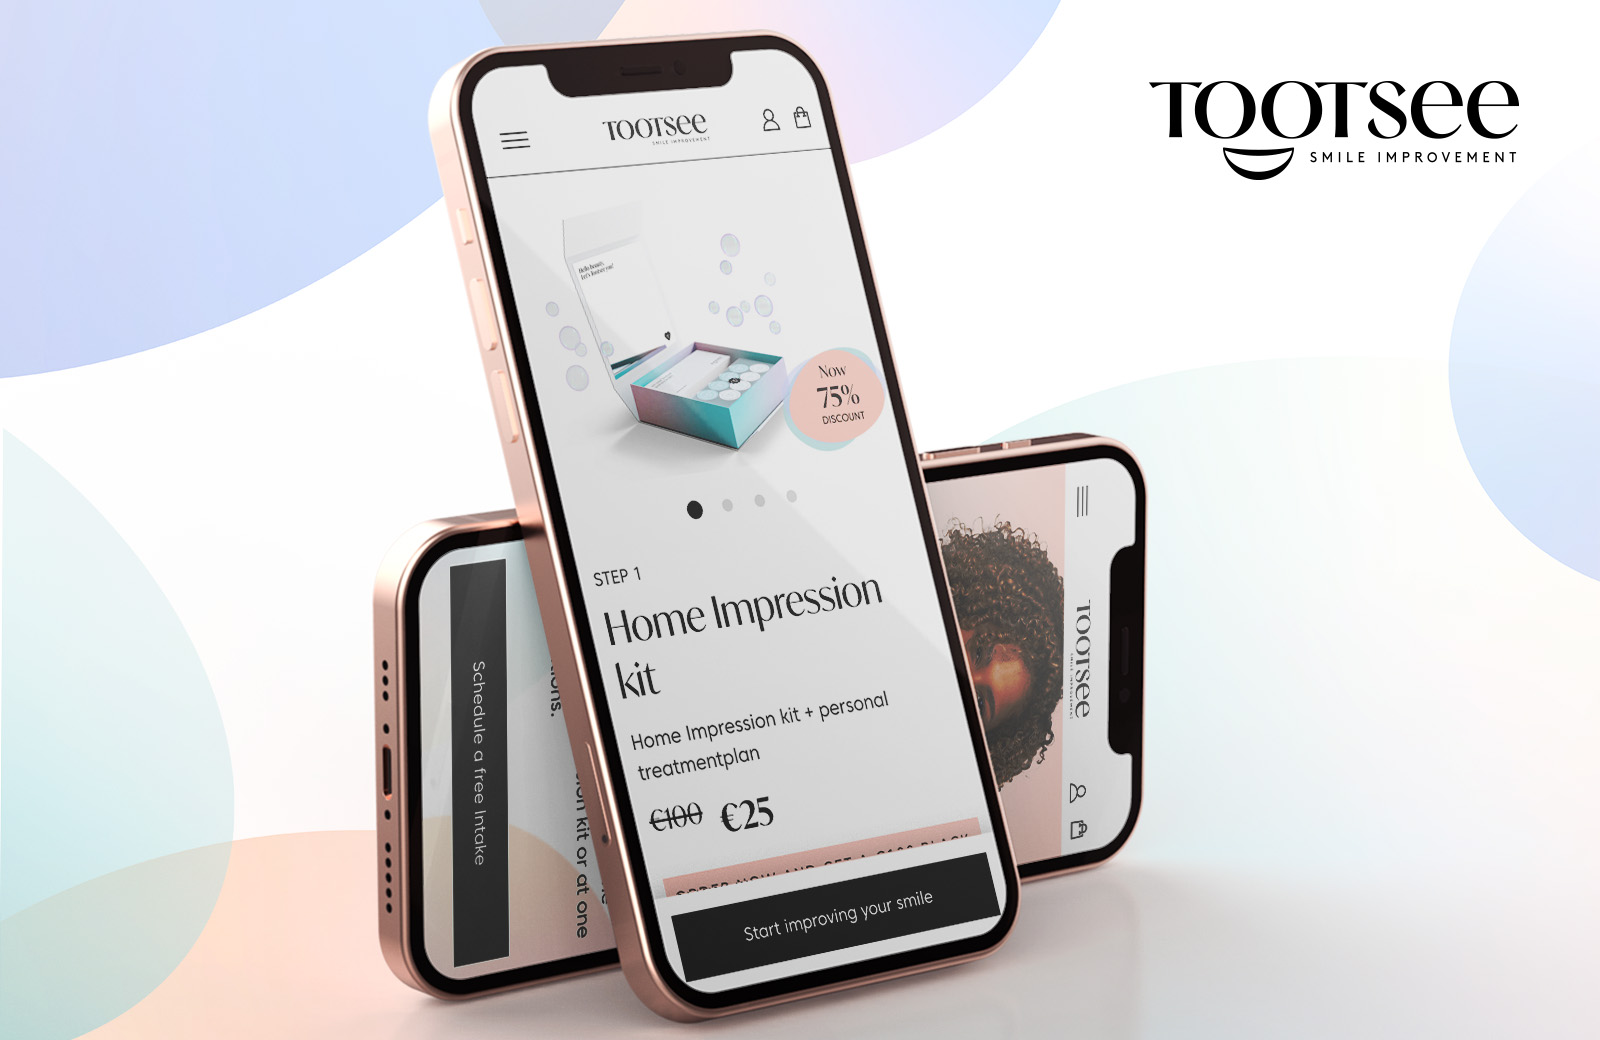 Tootsee home impression kit and homepage on iphone